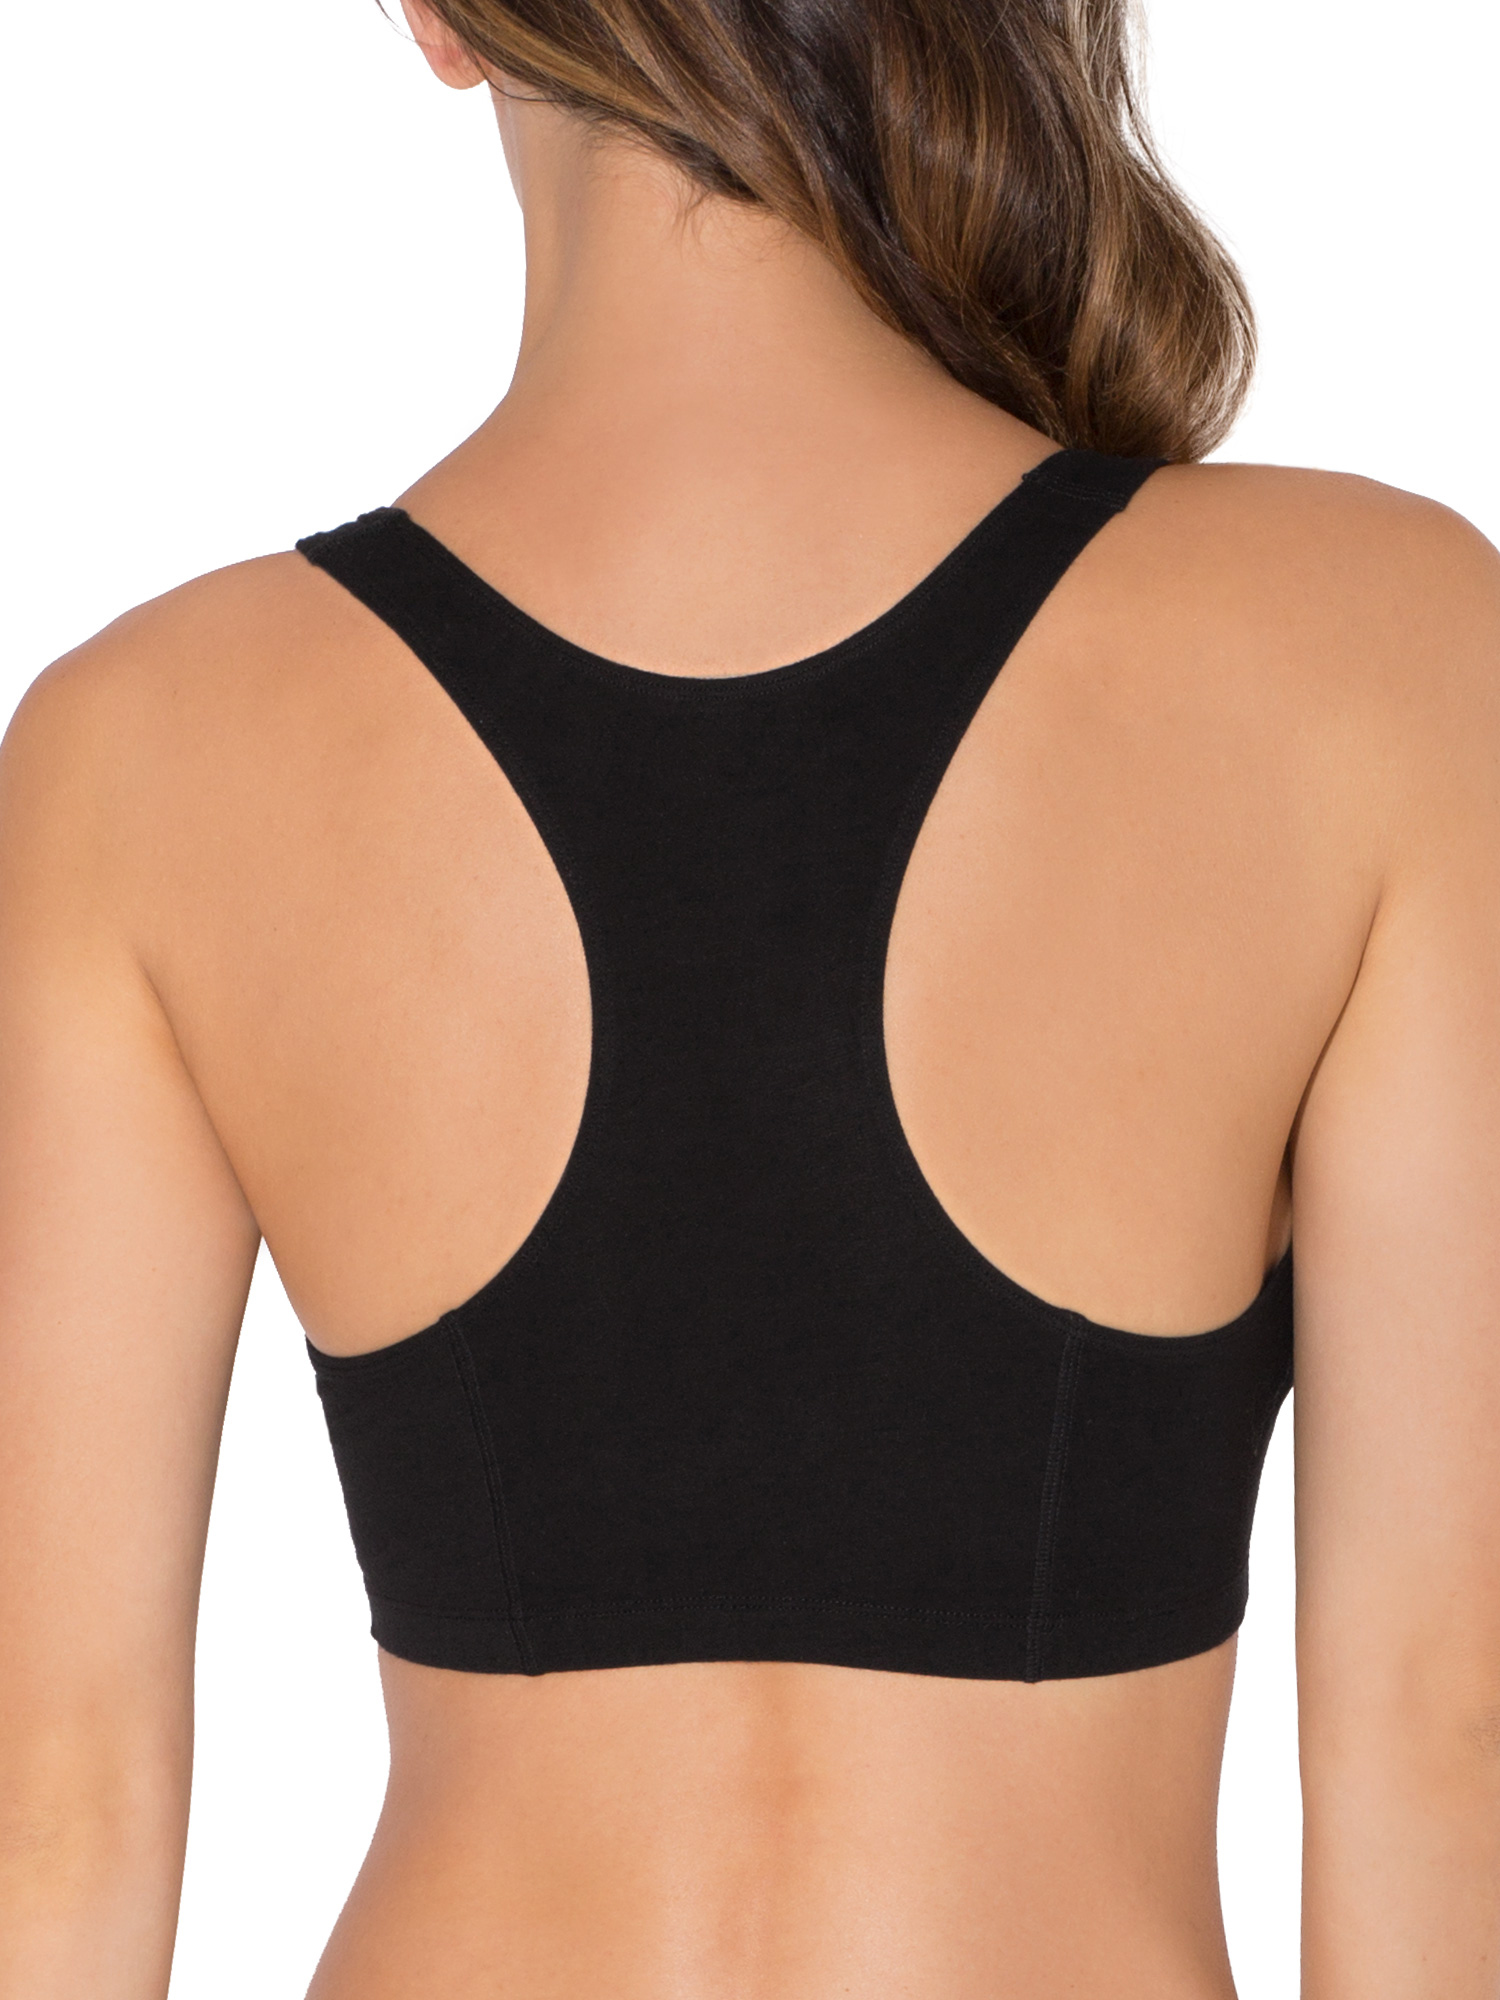 Fruit of the Loom Women's Racerback Style Cotton Sports Bra, 3-Pack, Style-9012 - image 5 of 8